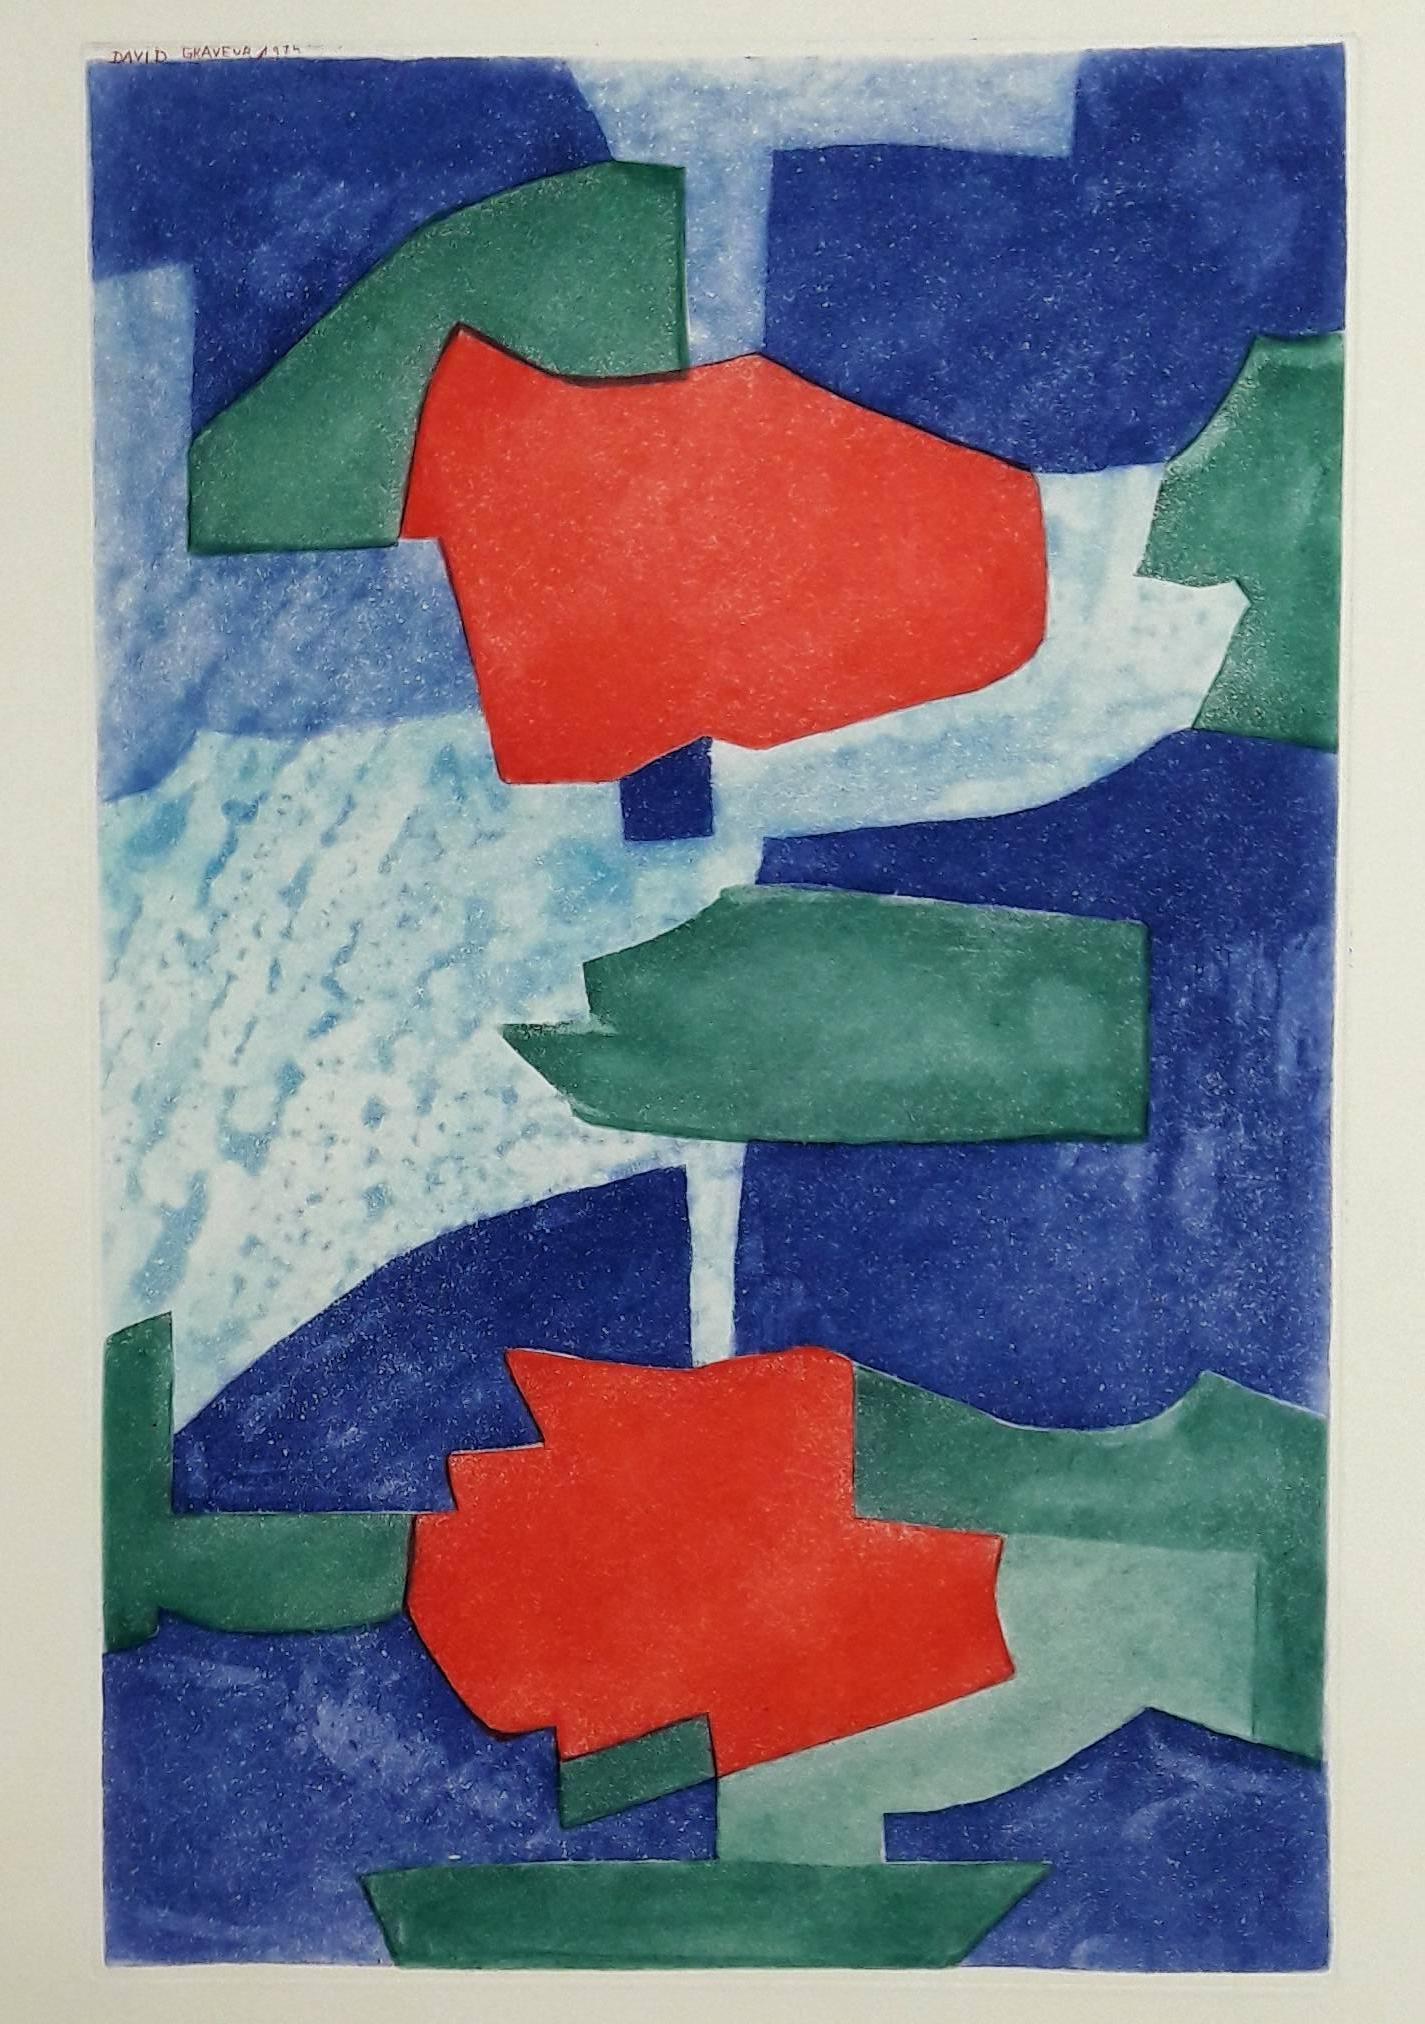 Composition Bleue, Verte et Rouge - Etching - 150 copies - Print by Serge Poliakoff